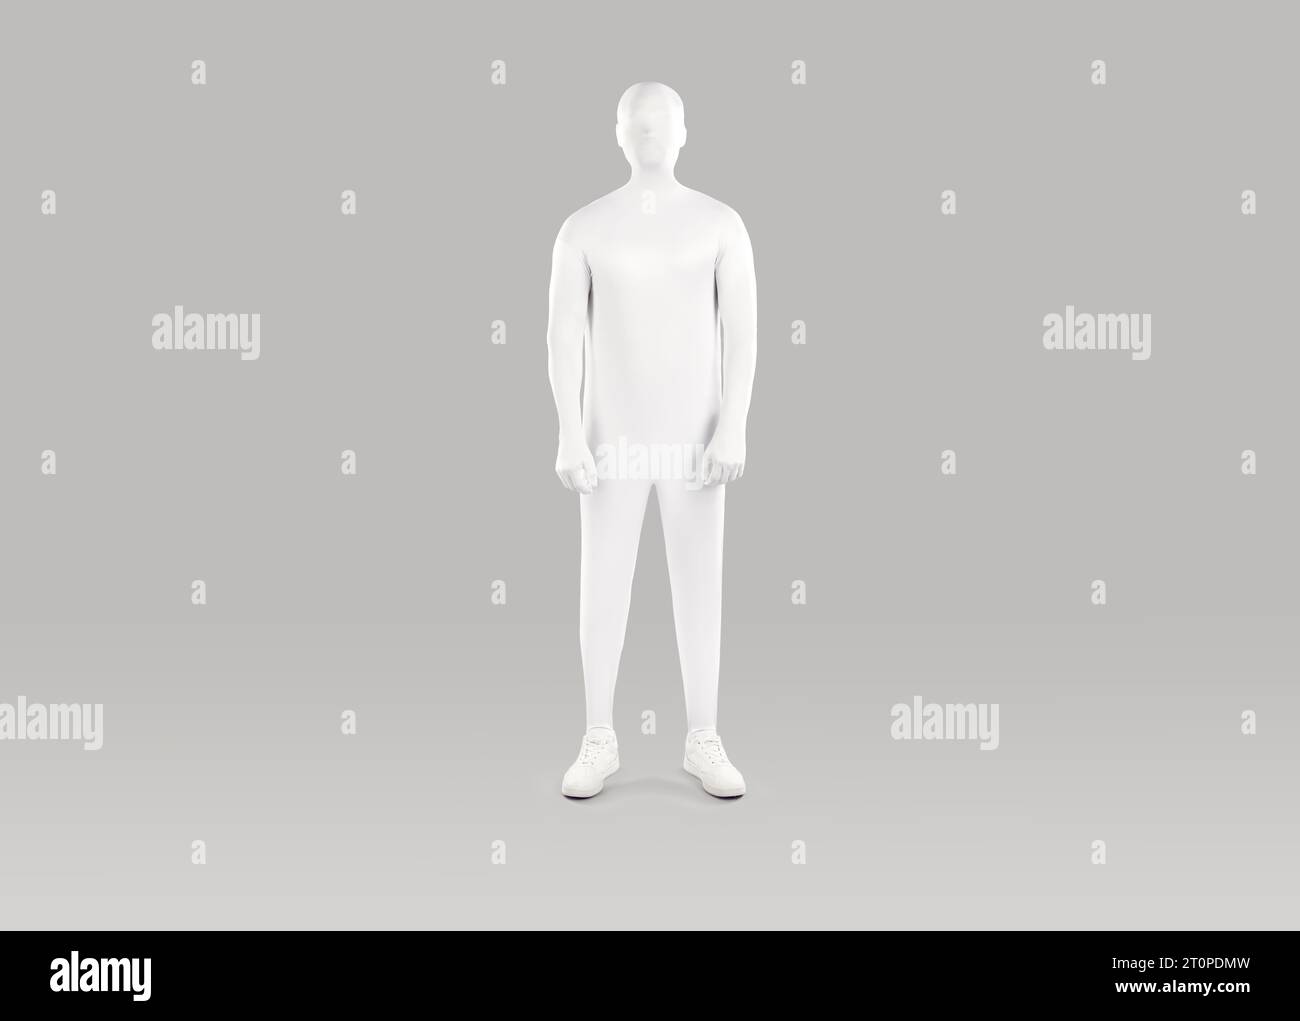 Portrait of a man wearing a white spandex bodysuit standing on a gray studio background Stock Photo